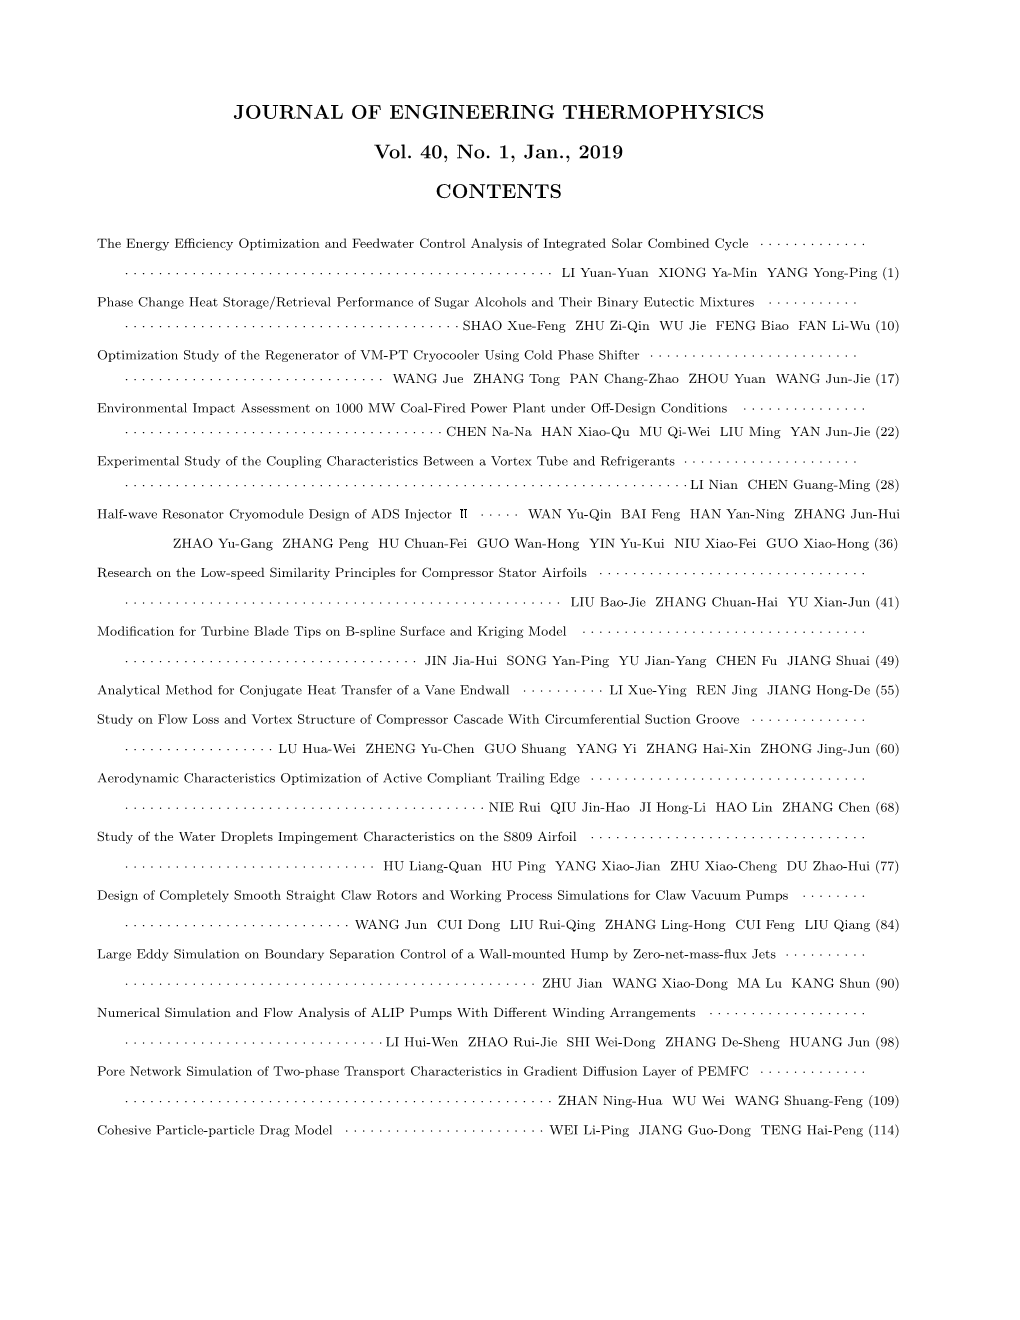 JOURNAL of ENGINEERING THERMOPHYSICS Vol. 40, No. 1, Jan., 2019 CONTENTS